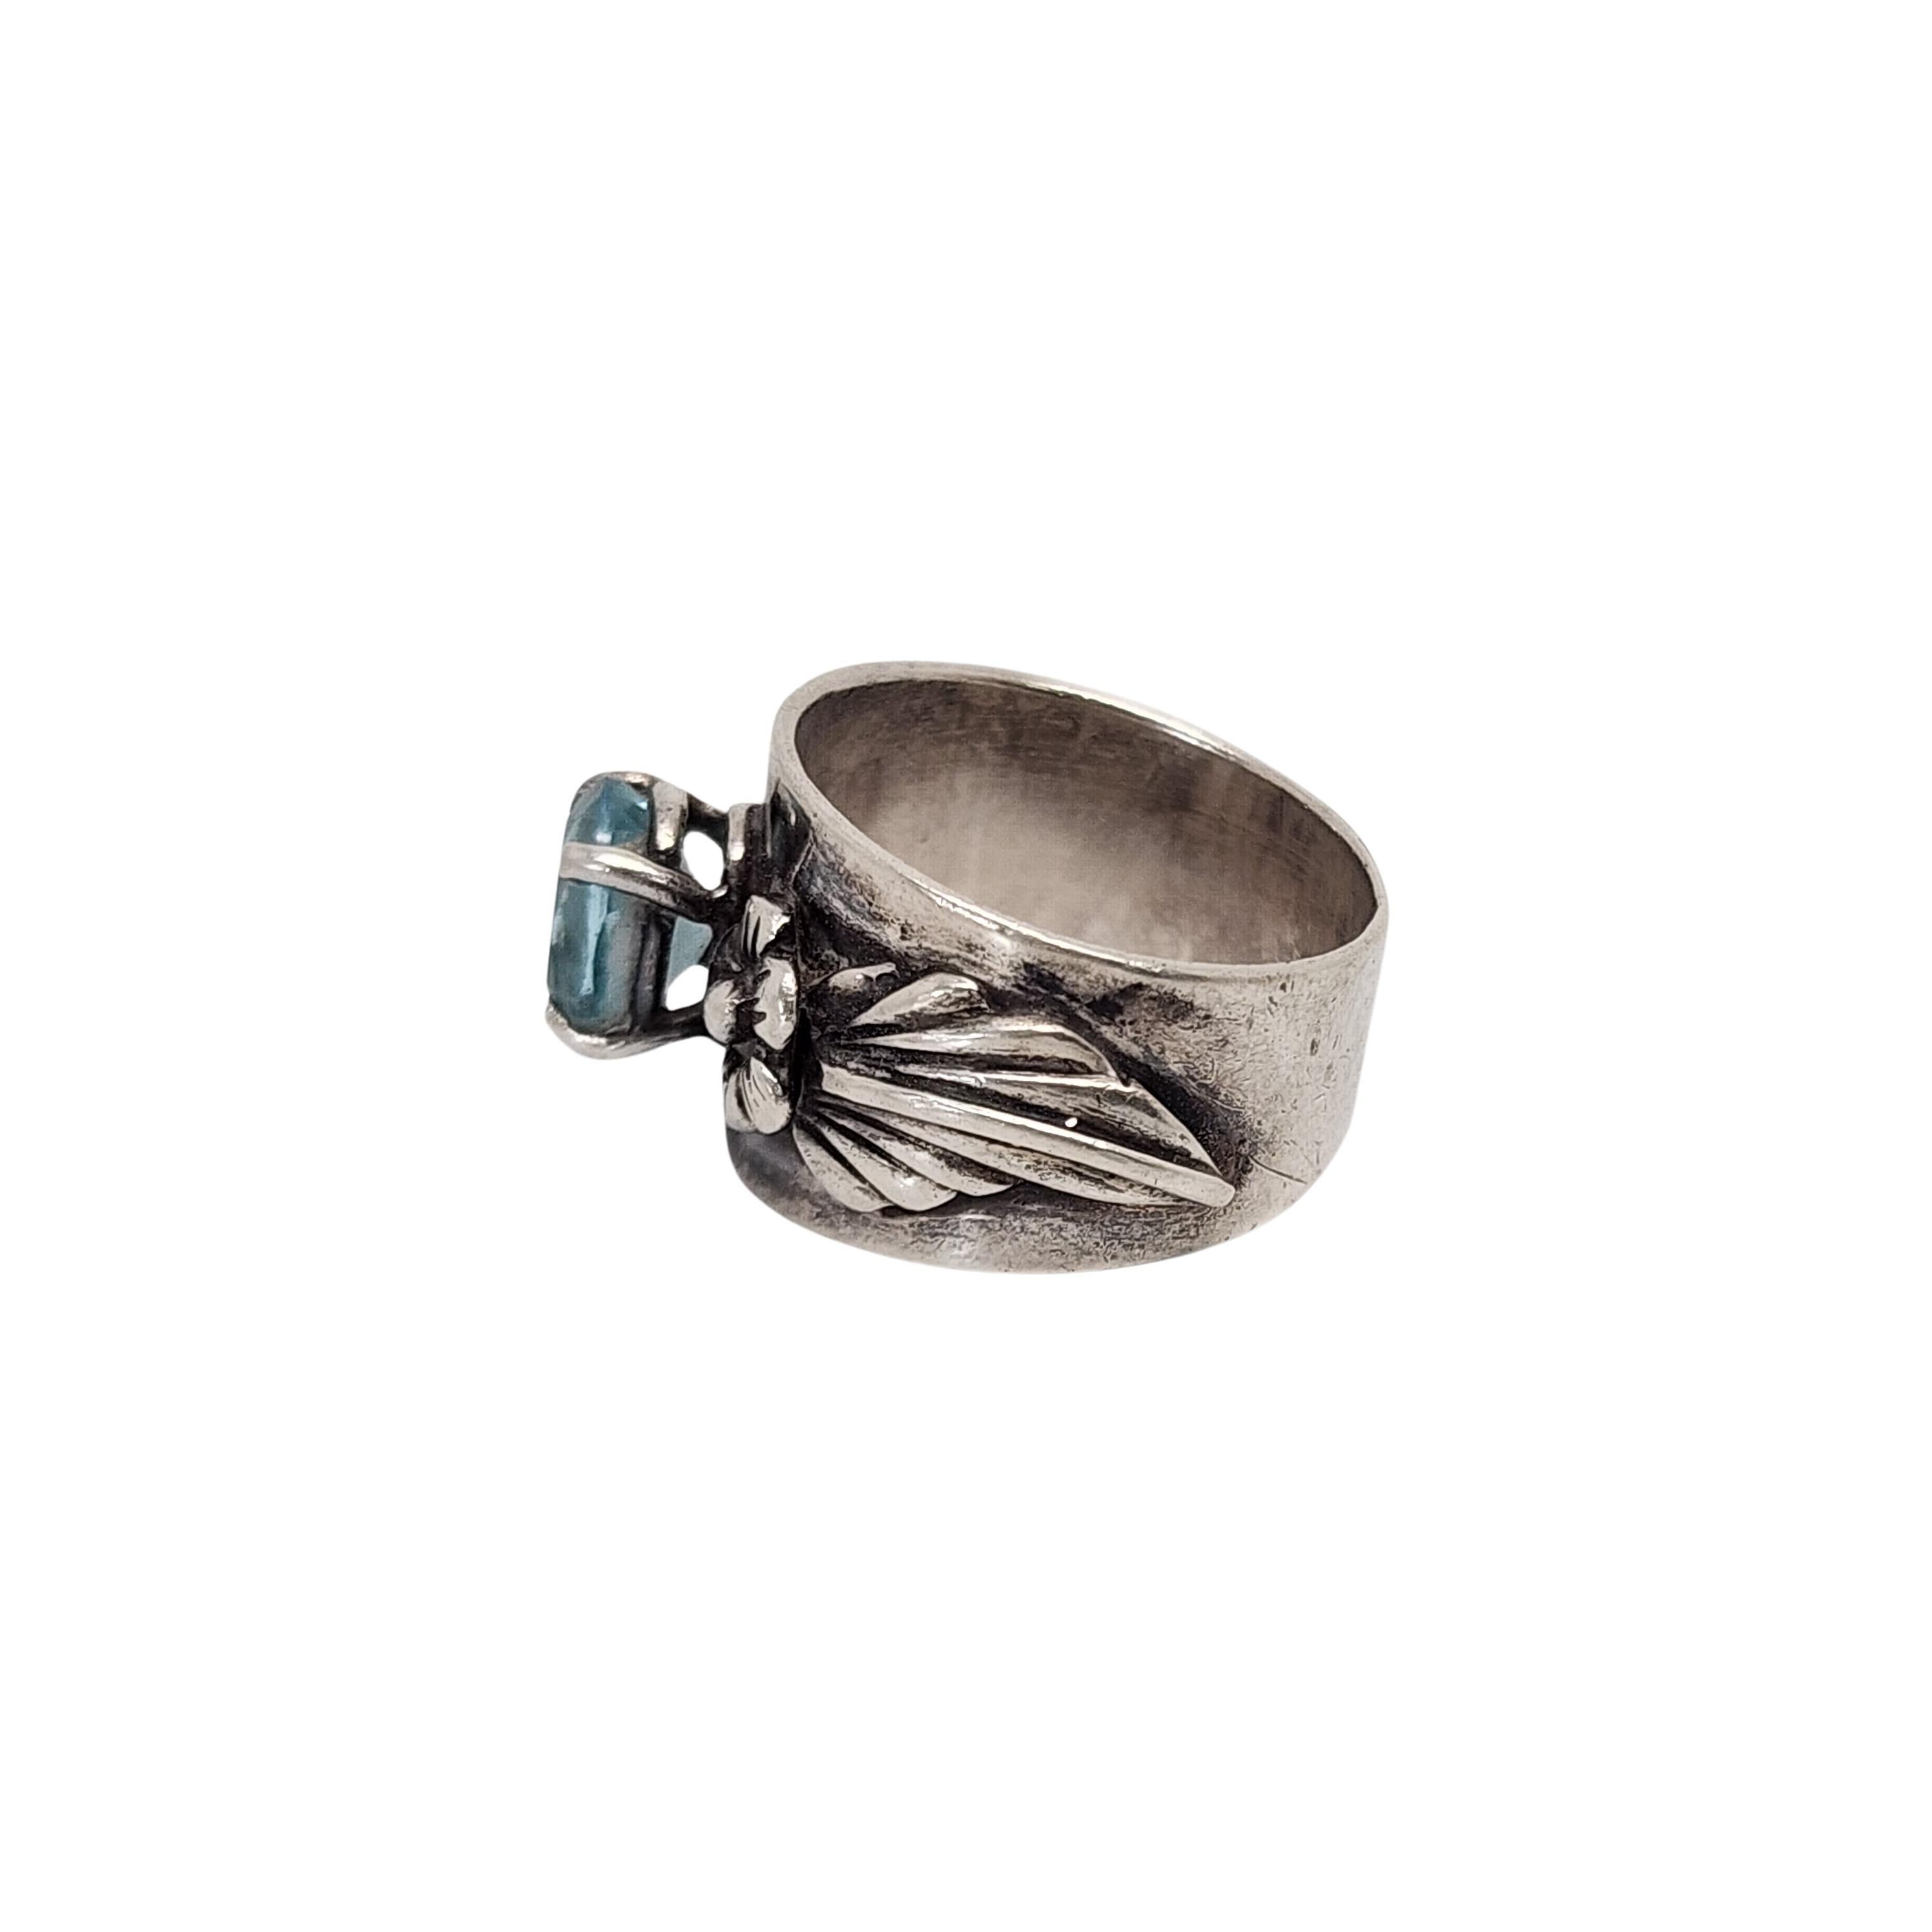 Vintage sterling silver blue topaz flower band ring by Carol Felley.

Size 6

Carol Felley is a renowned New Mexico jewelry designer that incorporates her love of beautiful symbols and natural elements. This piece features a prong set oval faceted